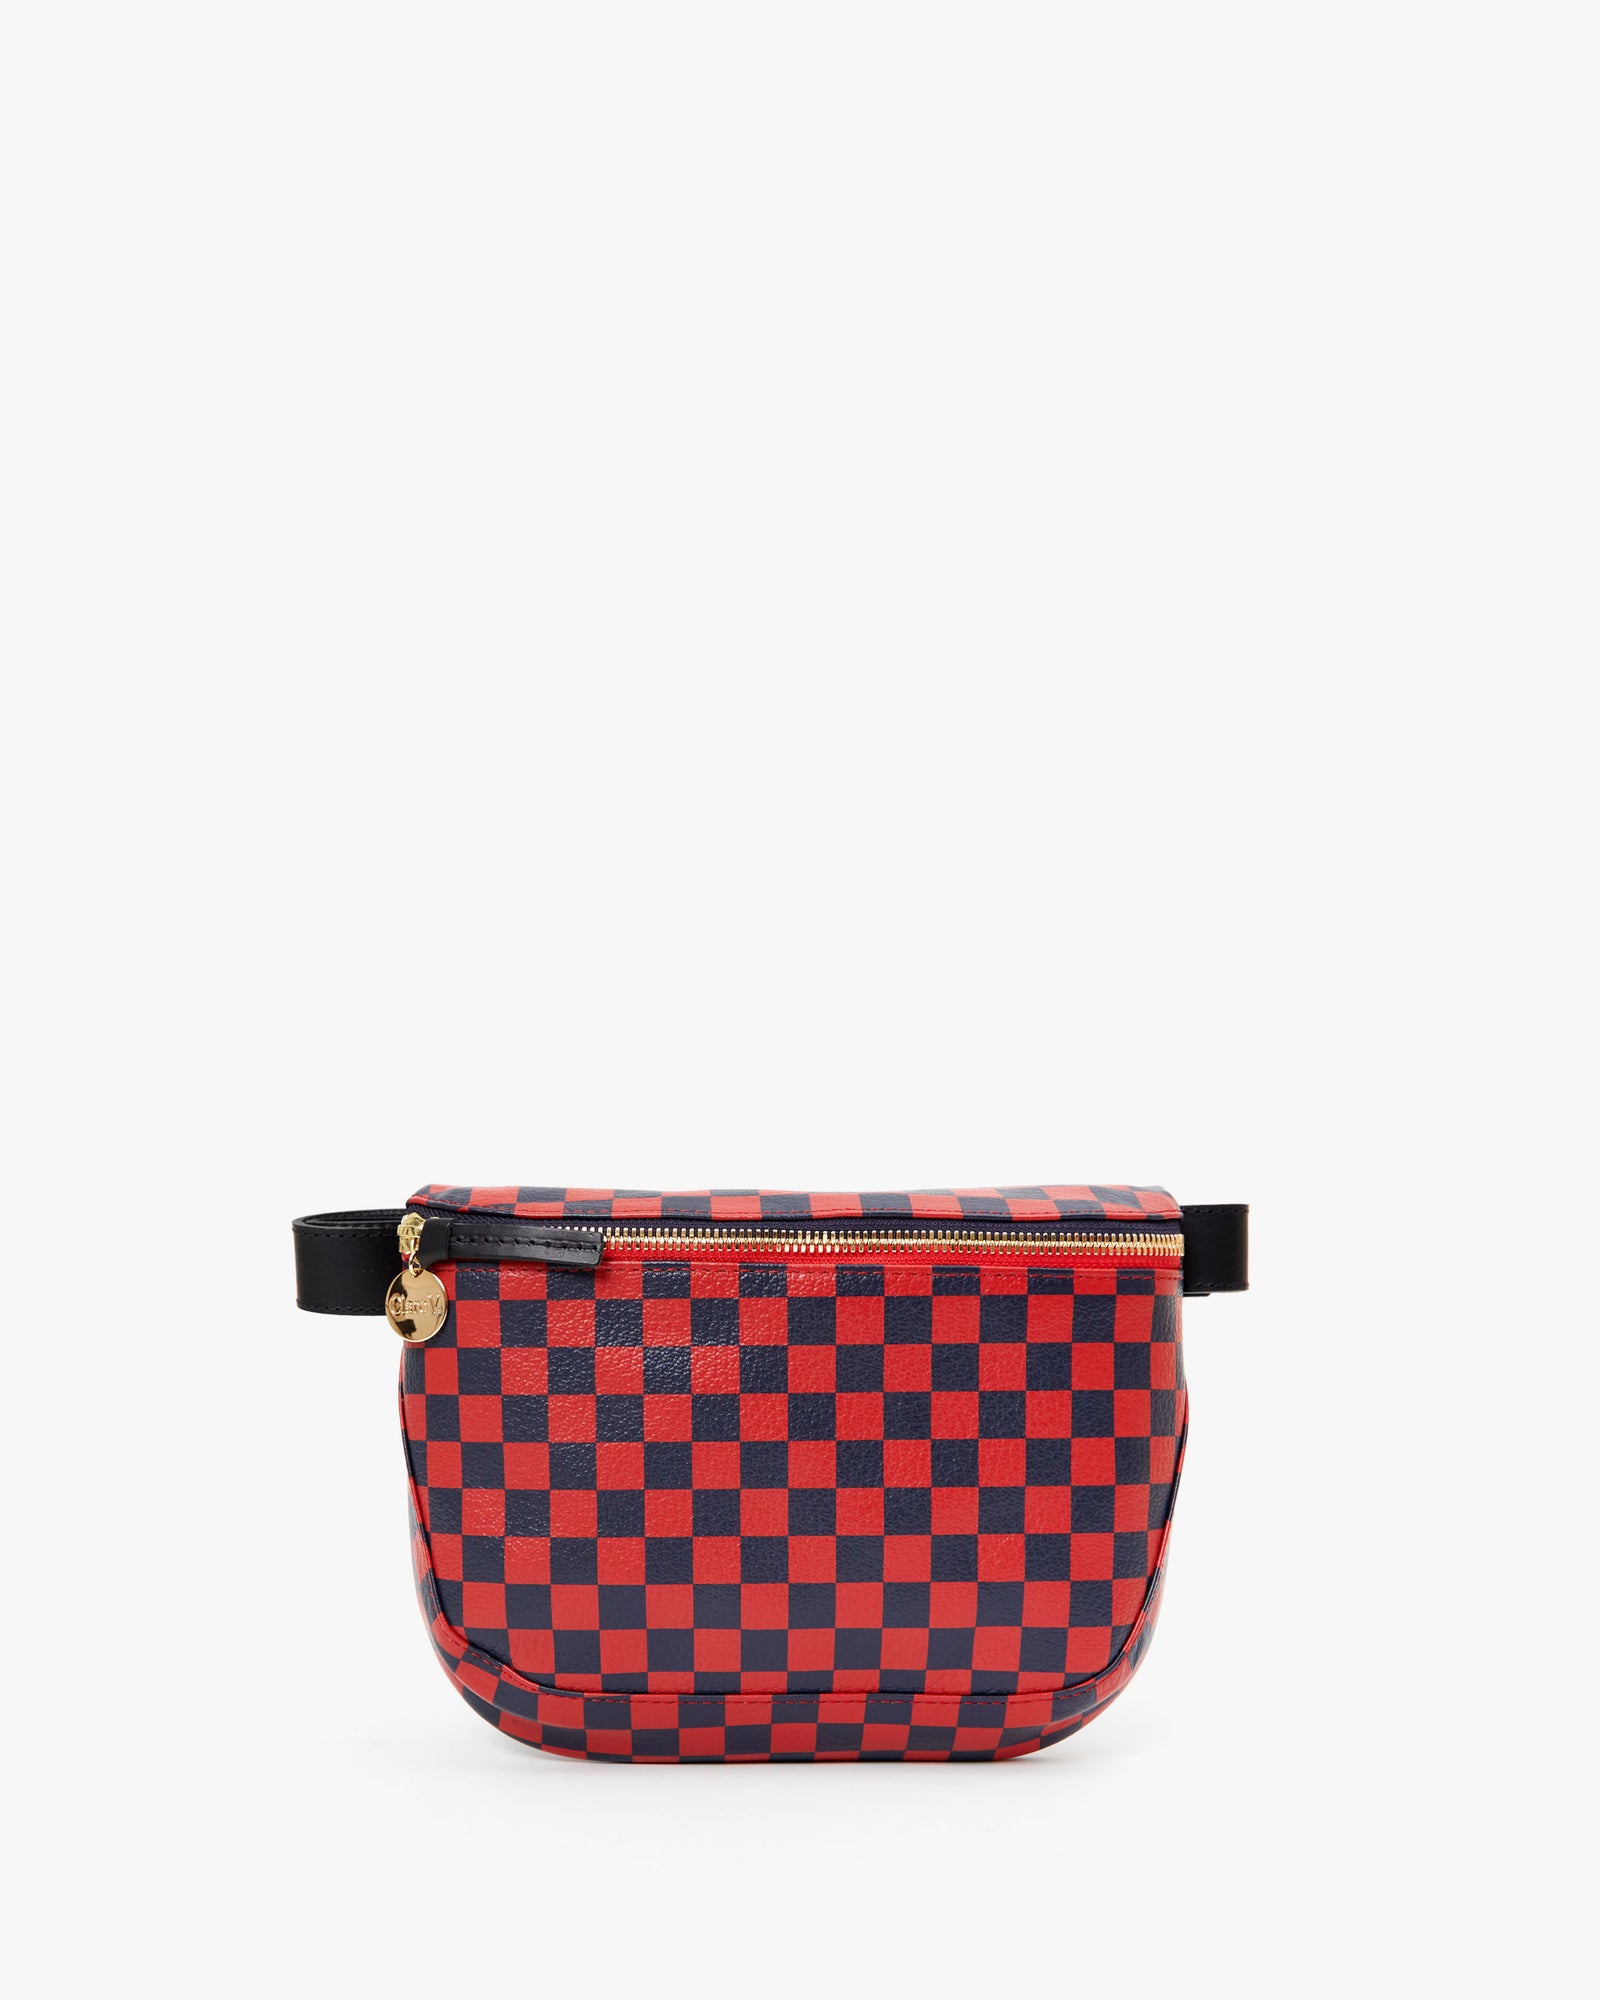 Clare V, Bags, Clare V Simple Tote In Black With Pacific Cherry Red Woven  Striped Checker